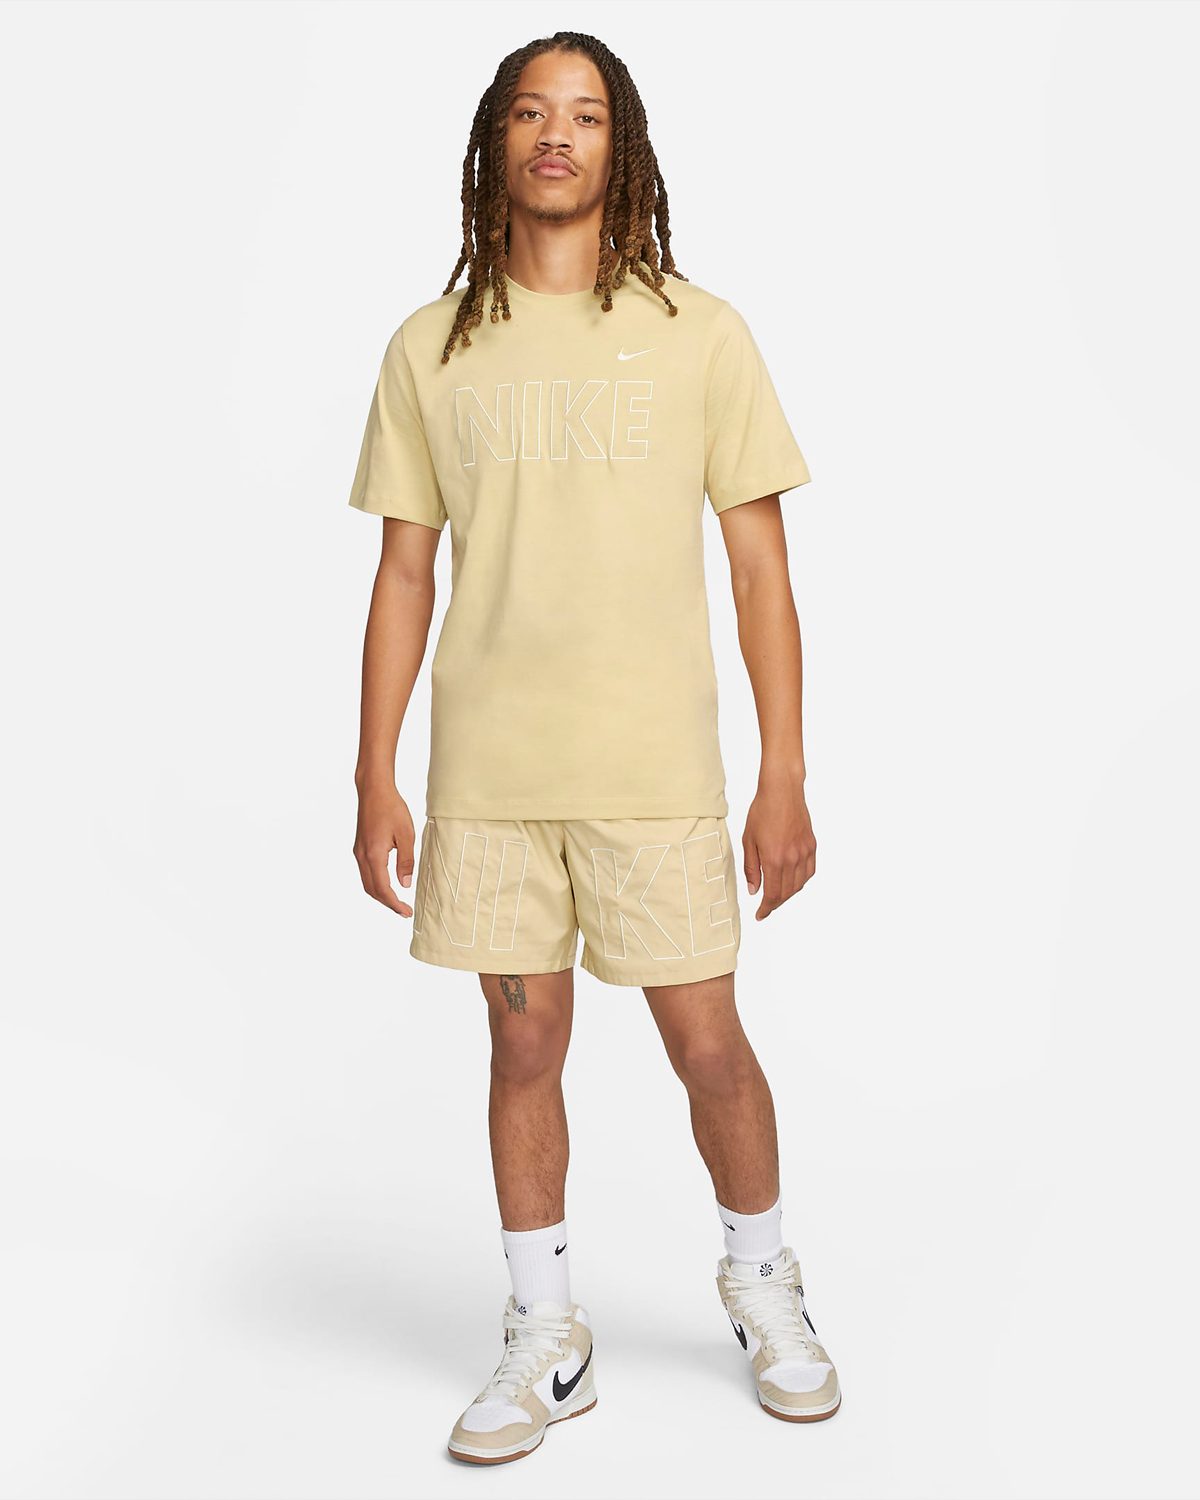 Nike Sportswear Team Gold Shirts Clothing Sneaker Outfits